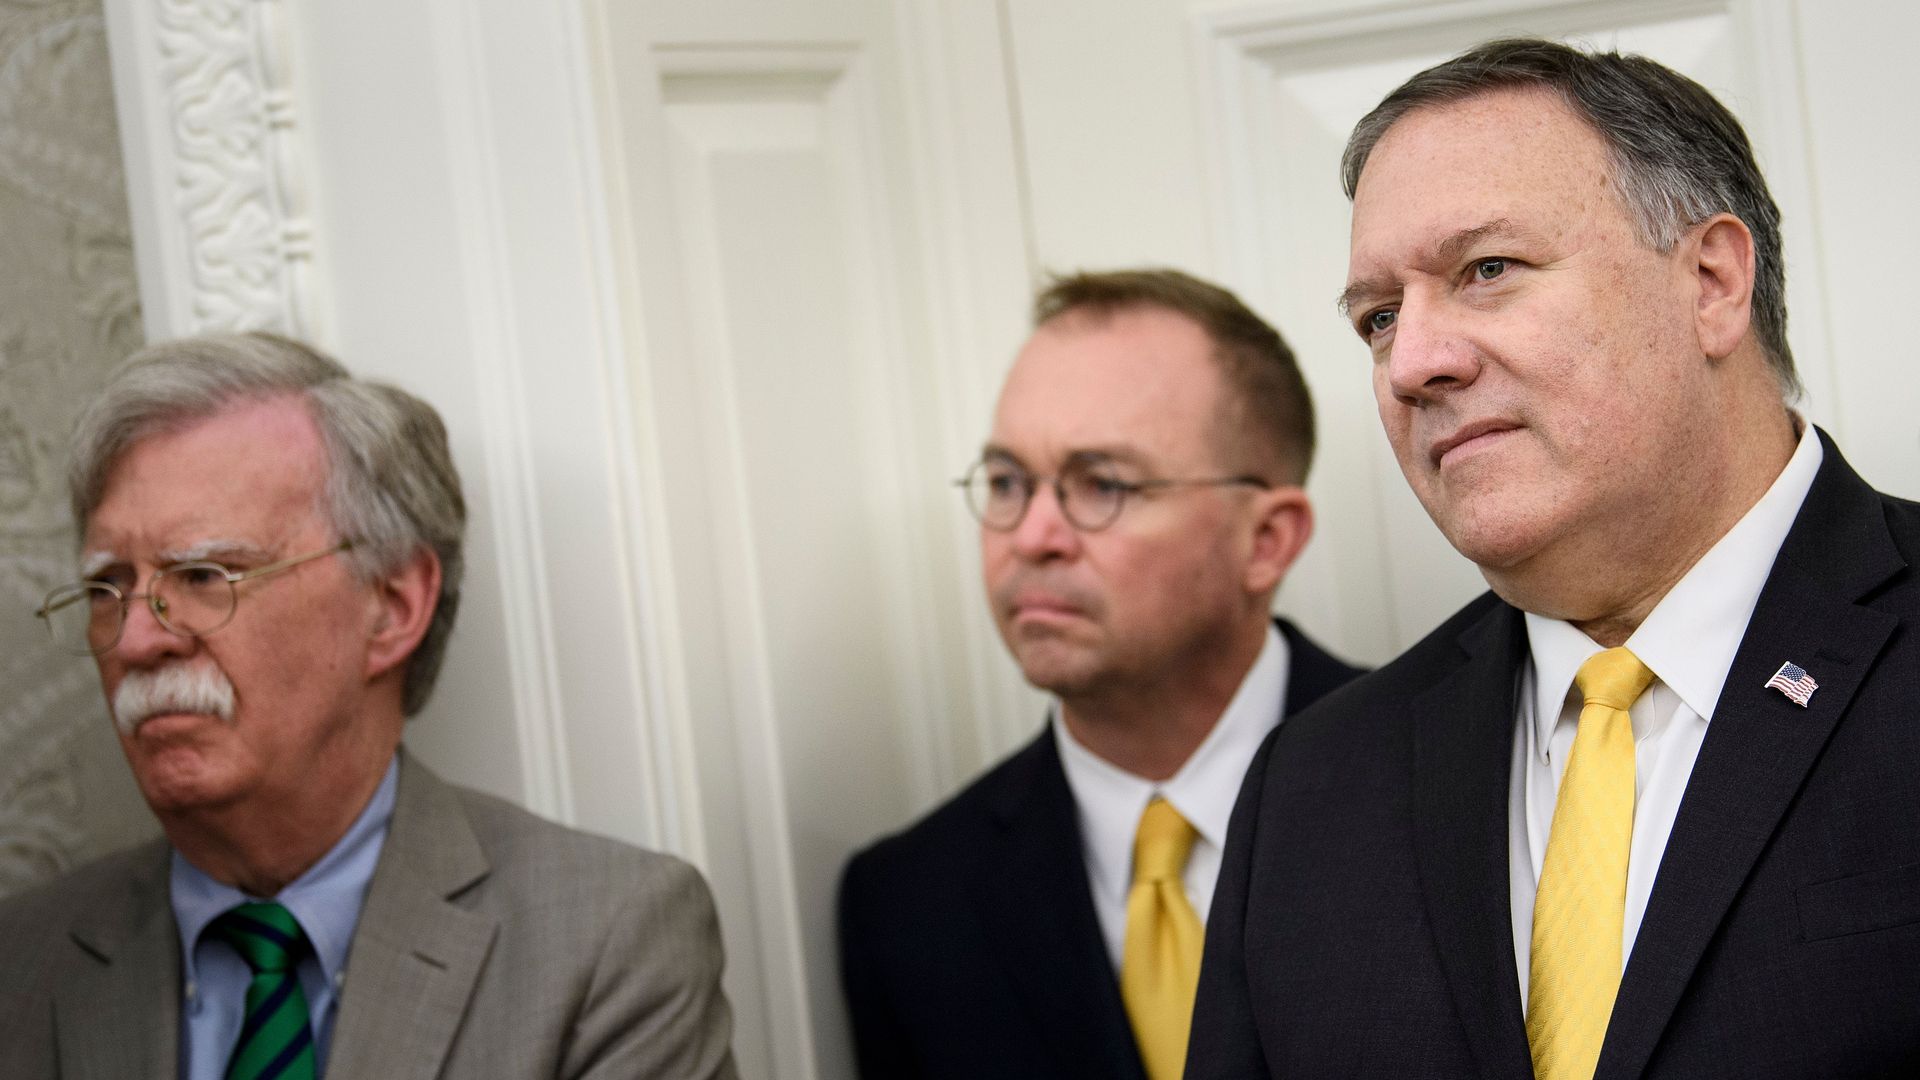 Pompeo and Bolton in a room